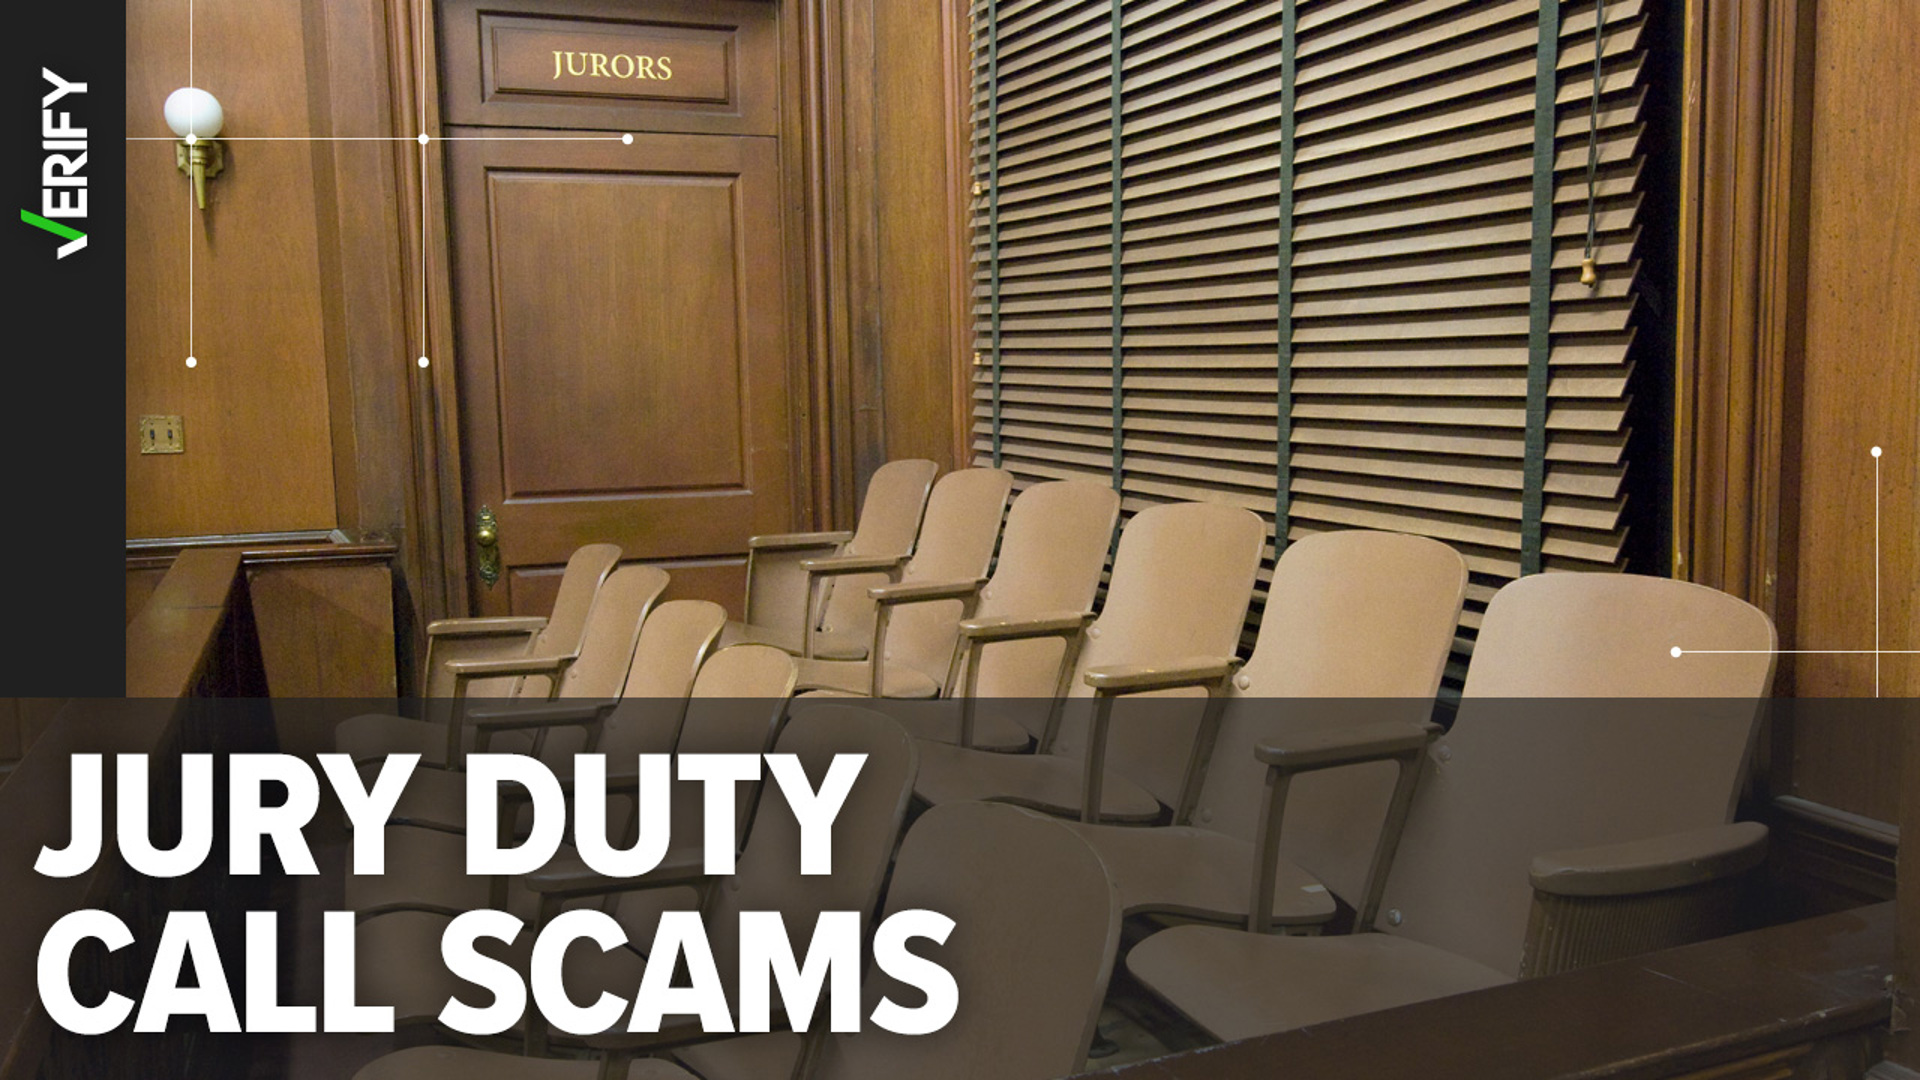 Phone Calls Threatening Arrest For Skipping Jury Duty Are Scams 1991